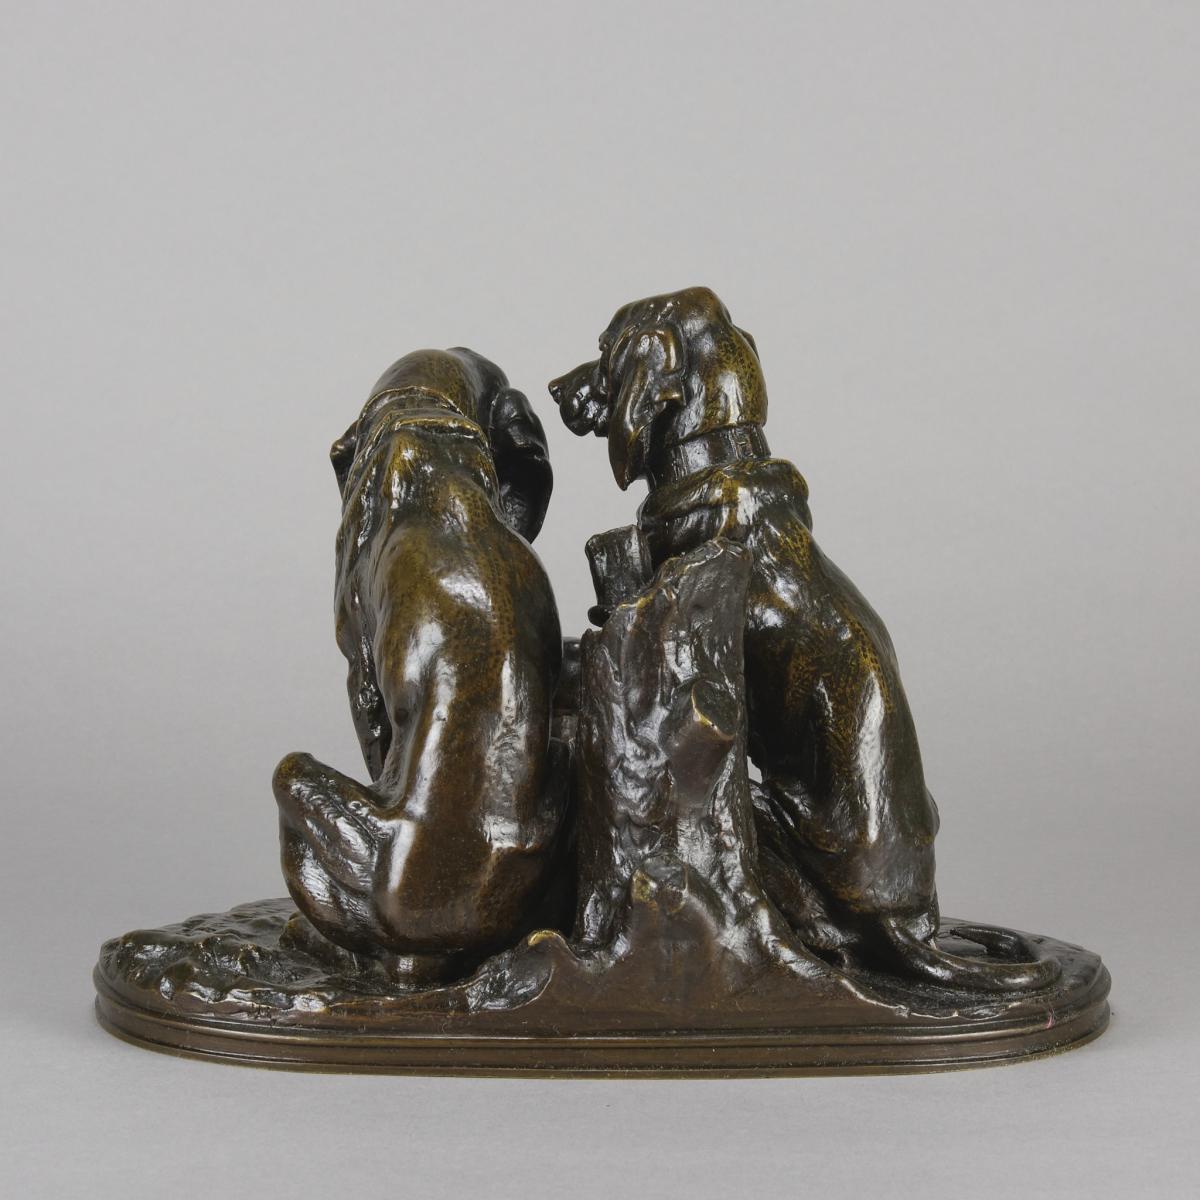 Late 19th Century Animalier Bronze entitled "Hound Family" by Alfred Jacquement